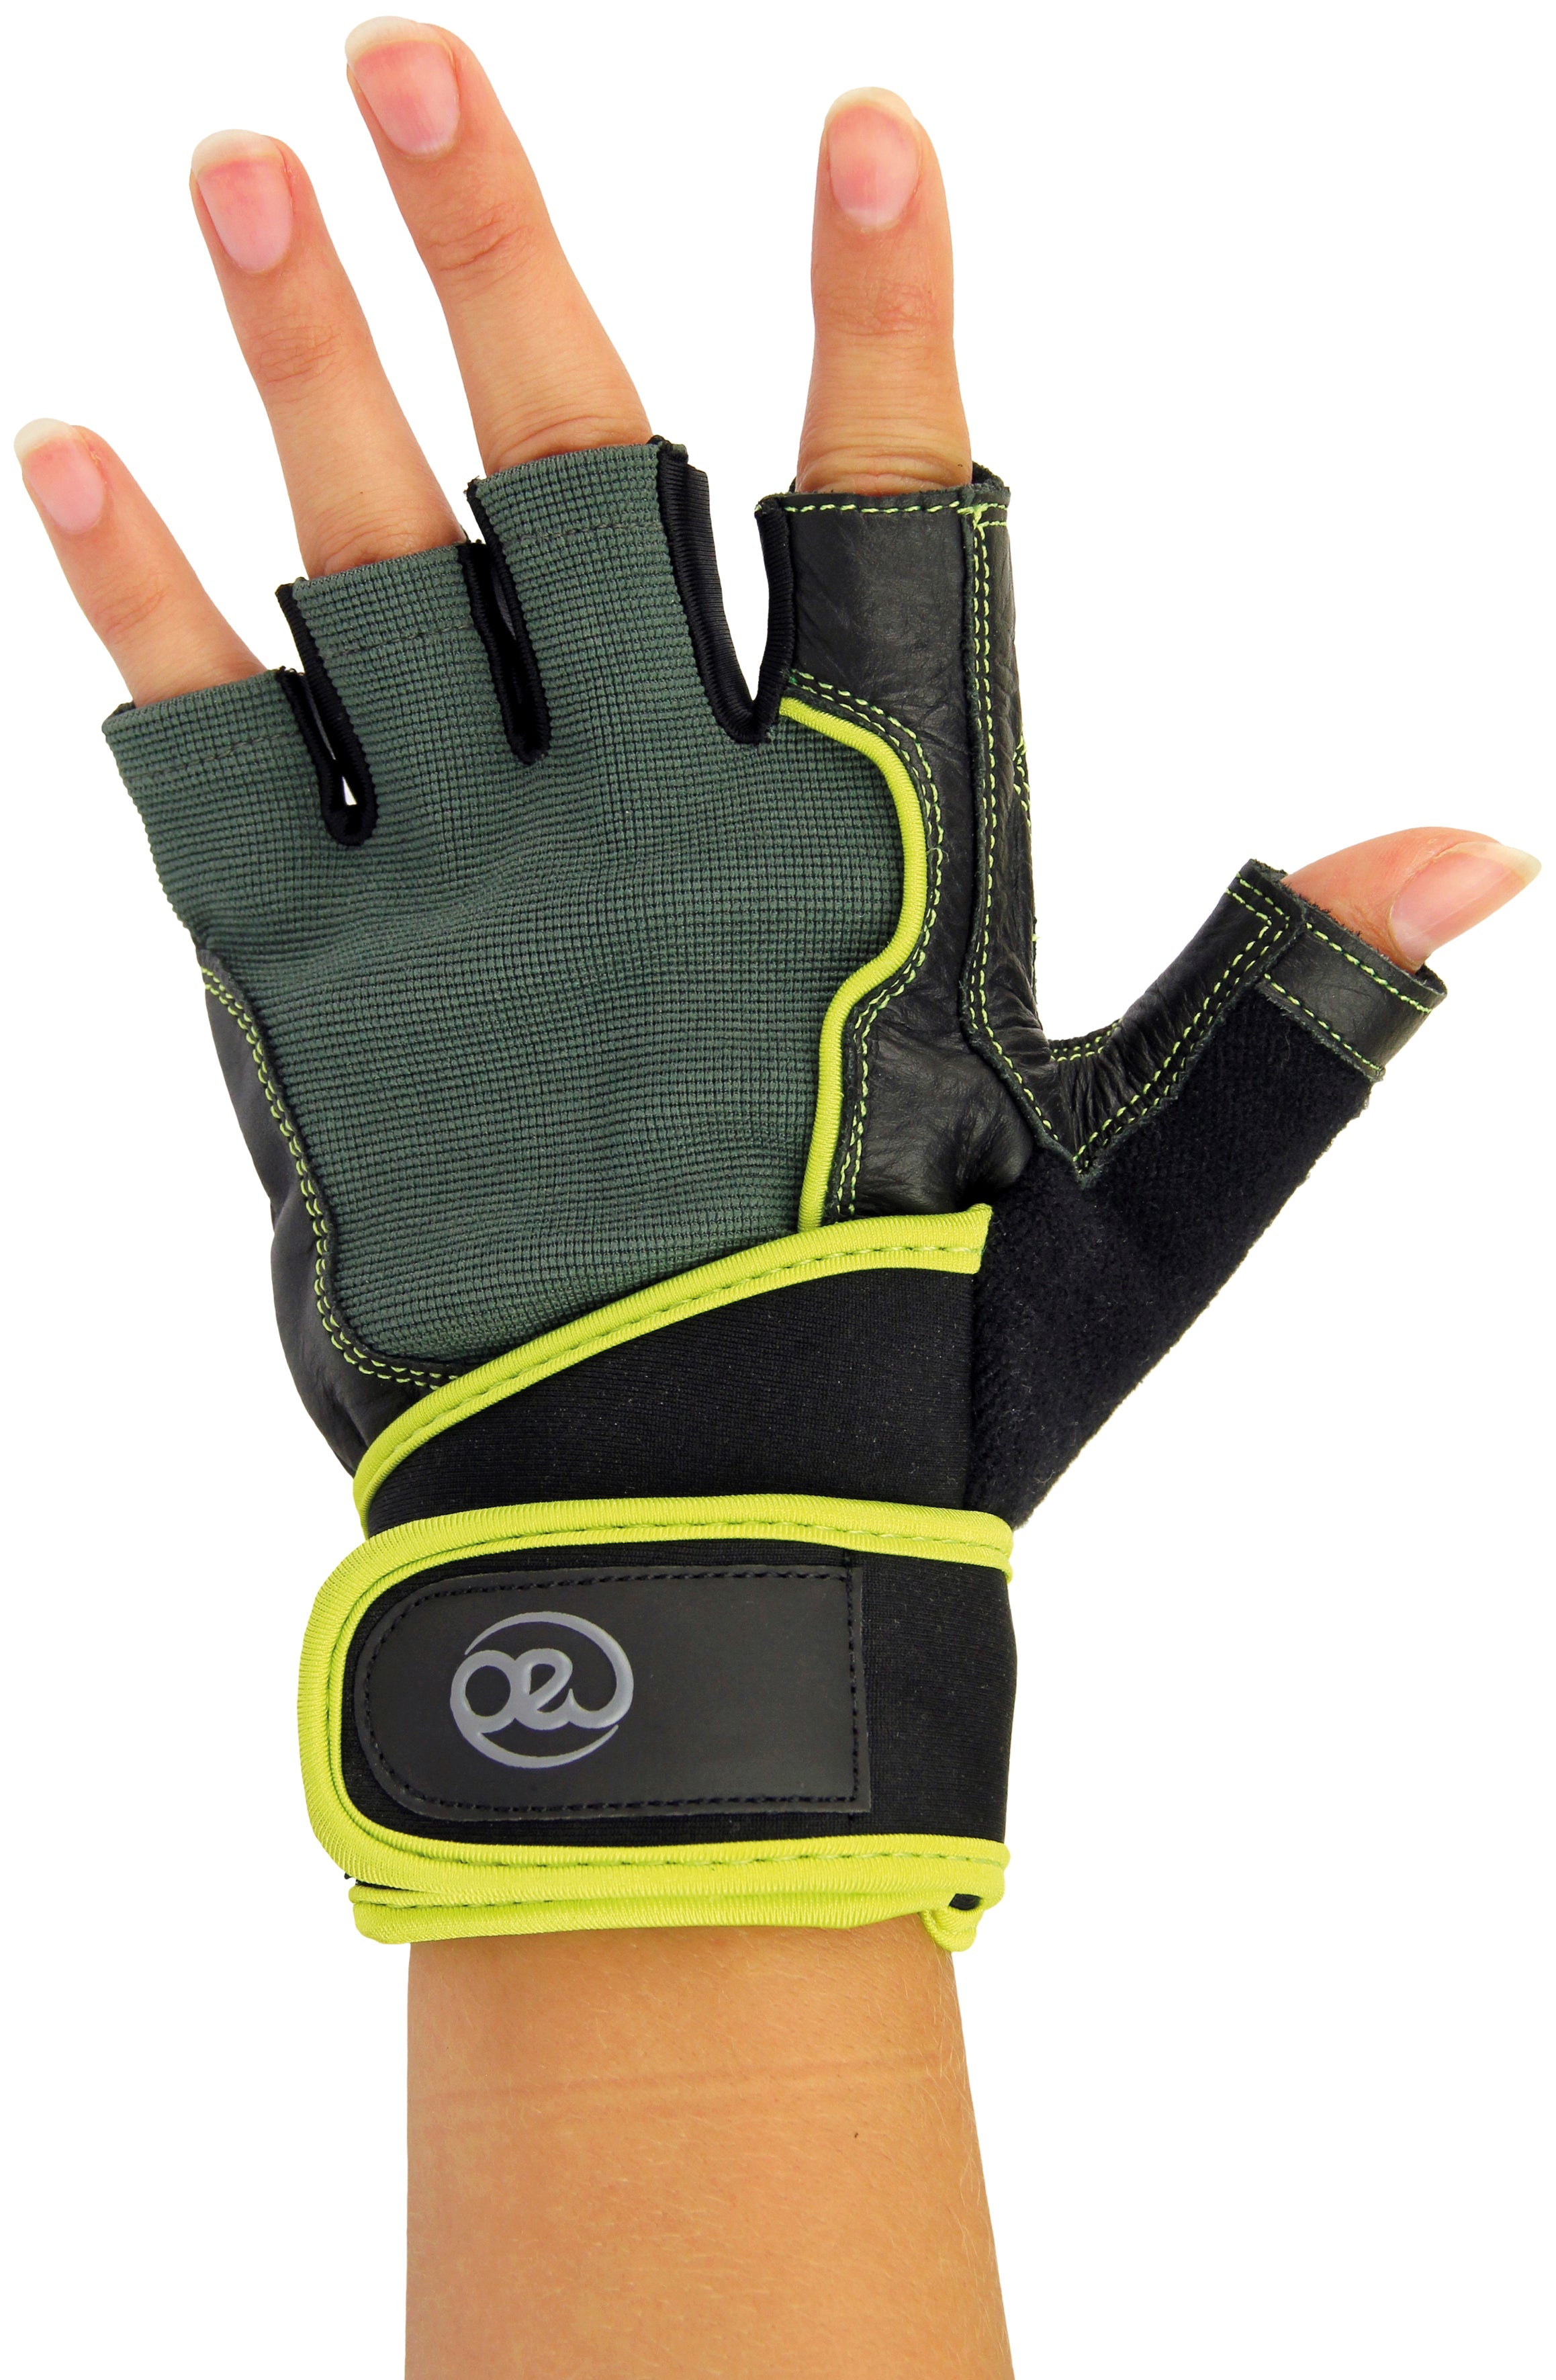 Fitness Mad Core Fitness and Weight Training Glove - Adult - Black